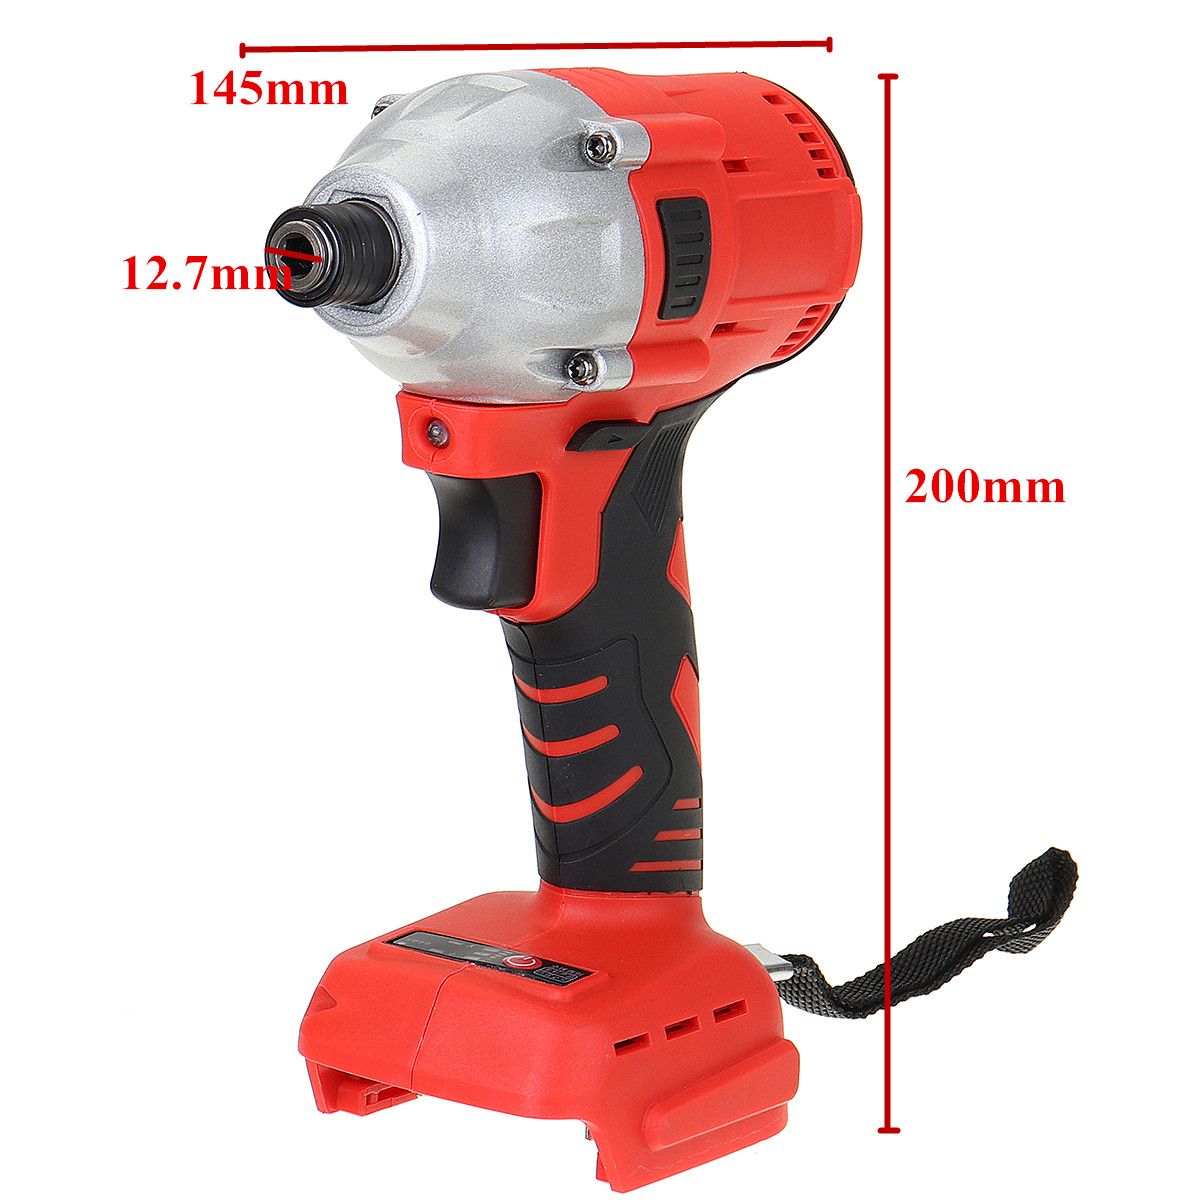 360NM-Cordless-Brushless-Li-ion-Impact-Drill-Diver-Rechargable-Electric-Screwdriver-Drill-For-Makita-1607387